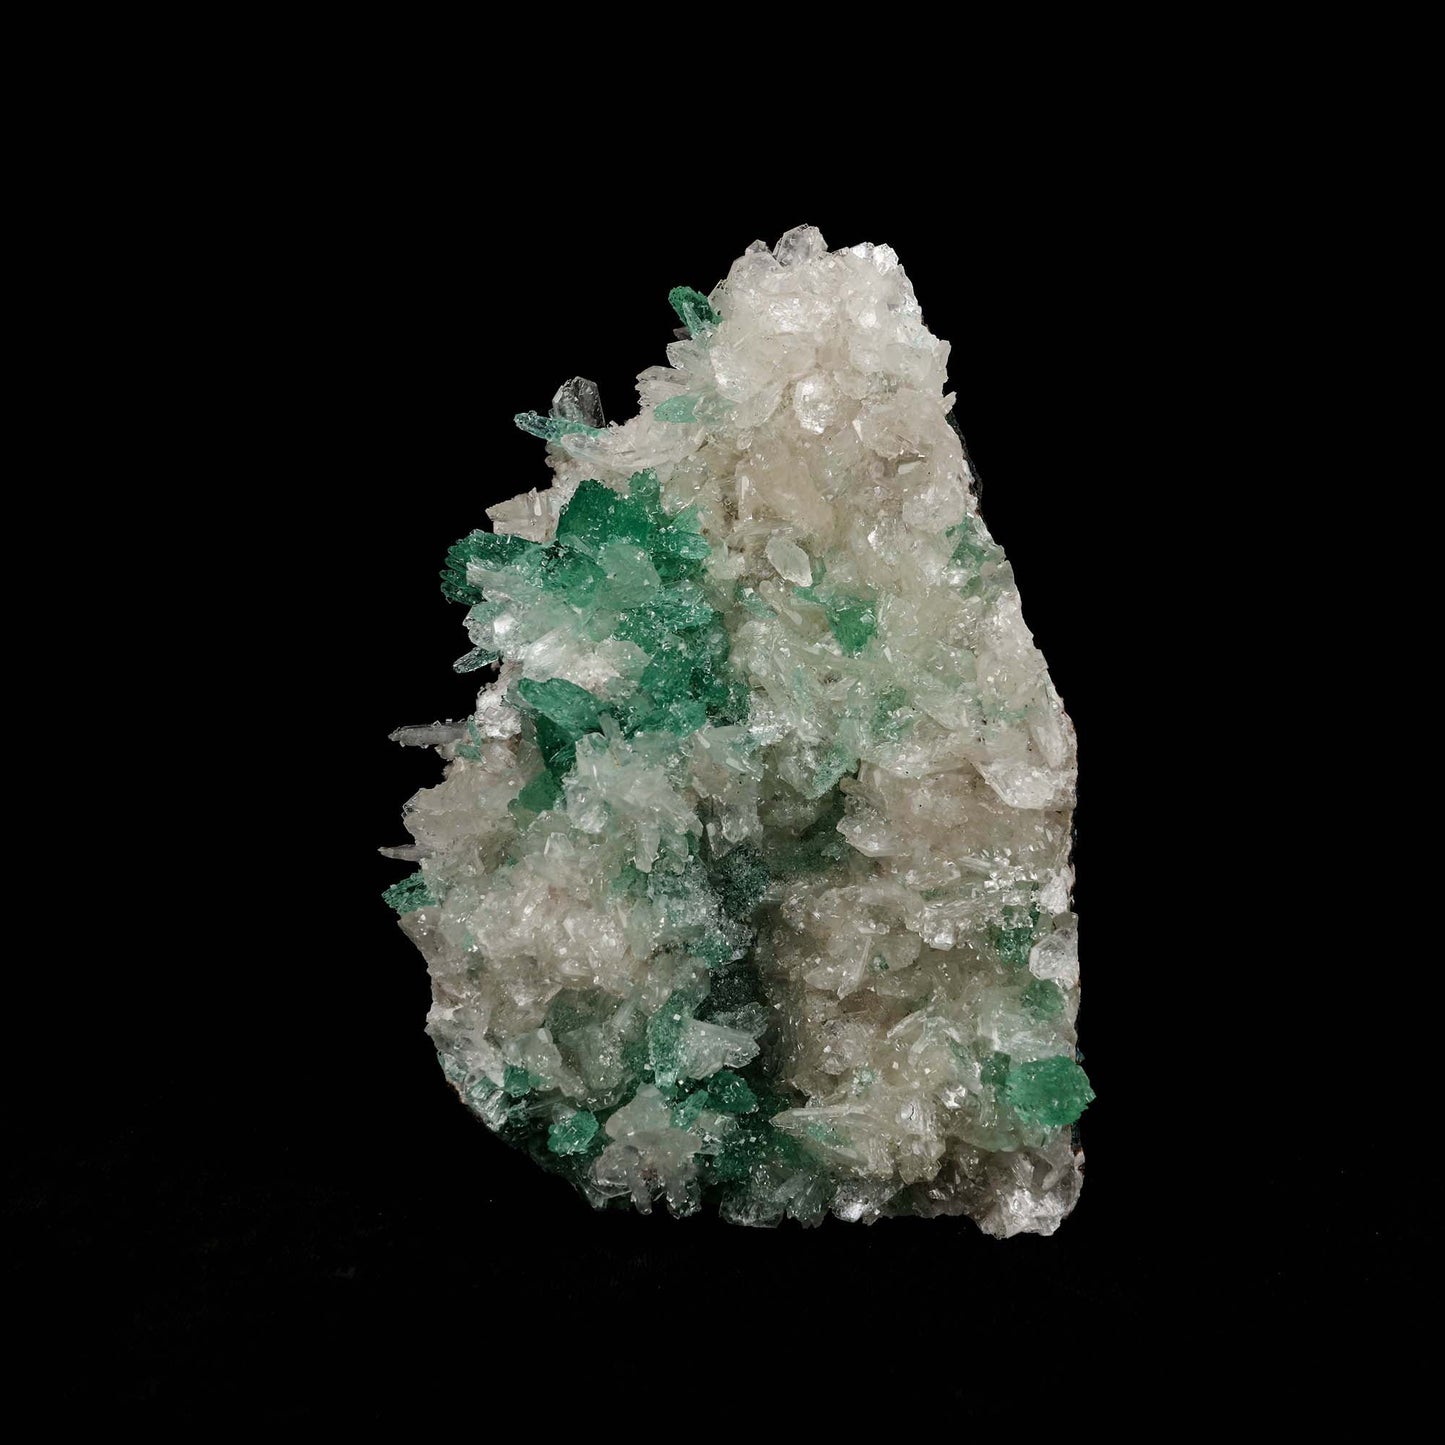 Green Apophyllite with Stilbite Natural Mineral Specimen # B 5200  https://www.superbminerals.us/products/green-apophyllite-with-stilbite-natural-mineral-specimen-b-5200  Features: On a plate of contrasting Stilbite crystals, a stunning example of glossy, radiating clusters of translucent green Apophyllite crystals. Flat terminations characterise these rare Apophyllite crystals, and the radiating, round-like clusters are stunning.This is a fantastic piece in fantastic condition.